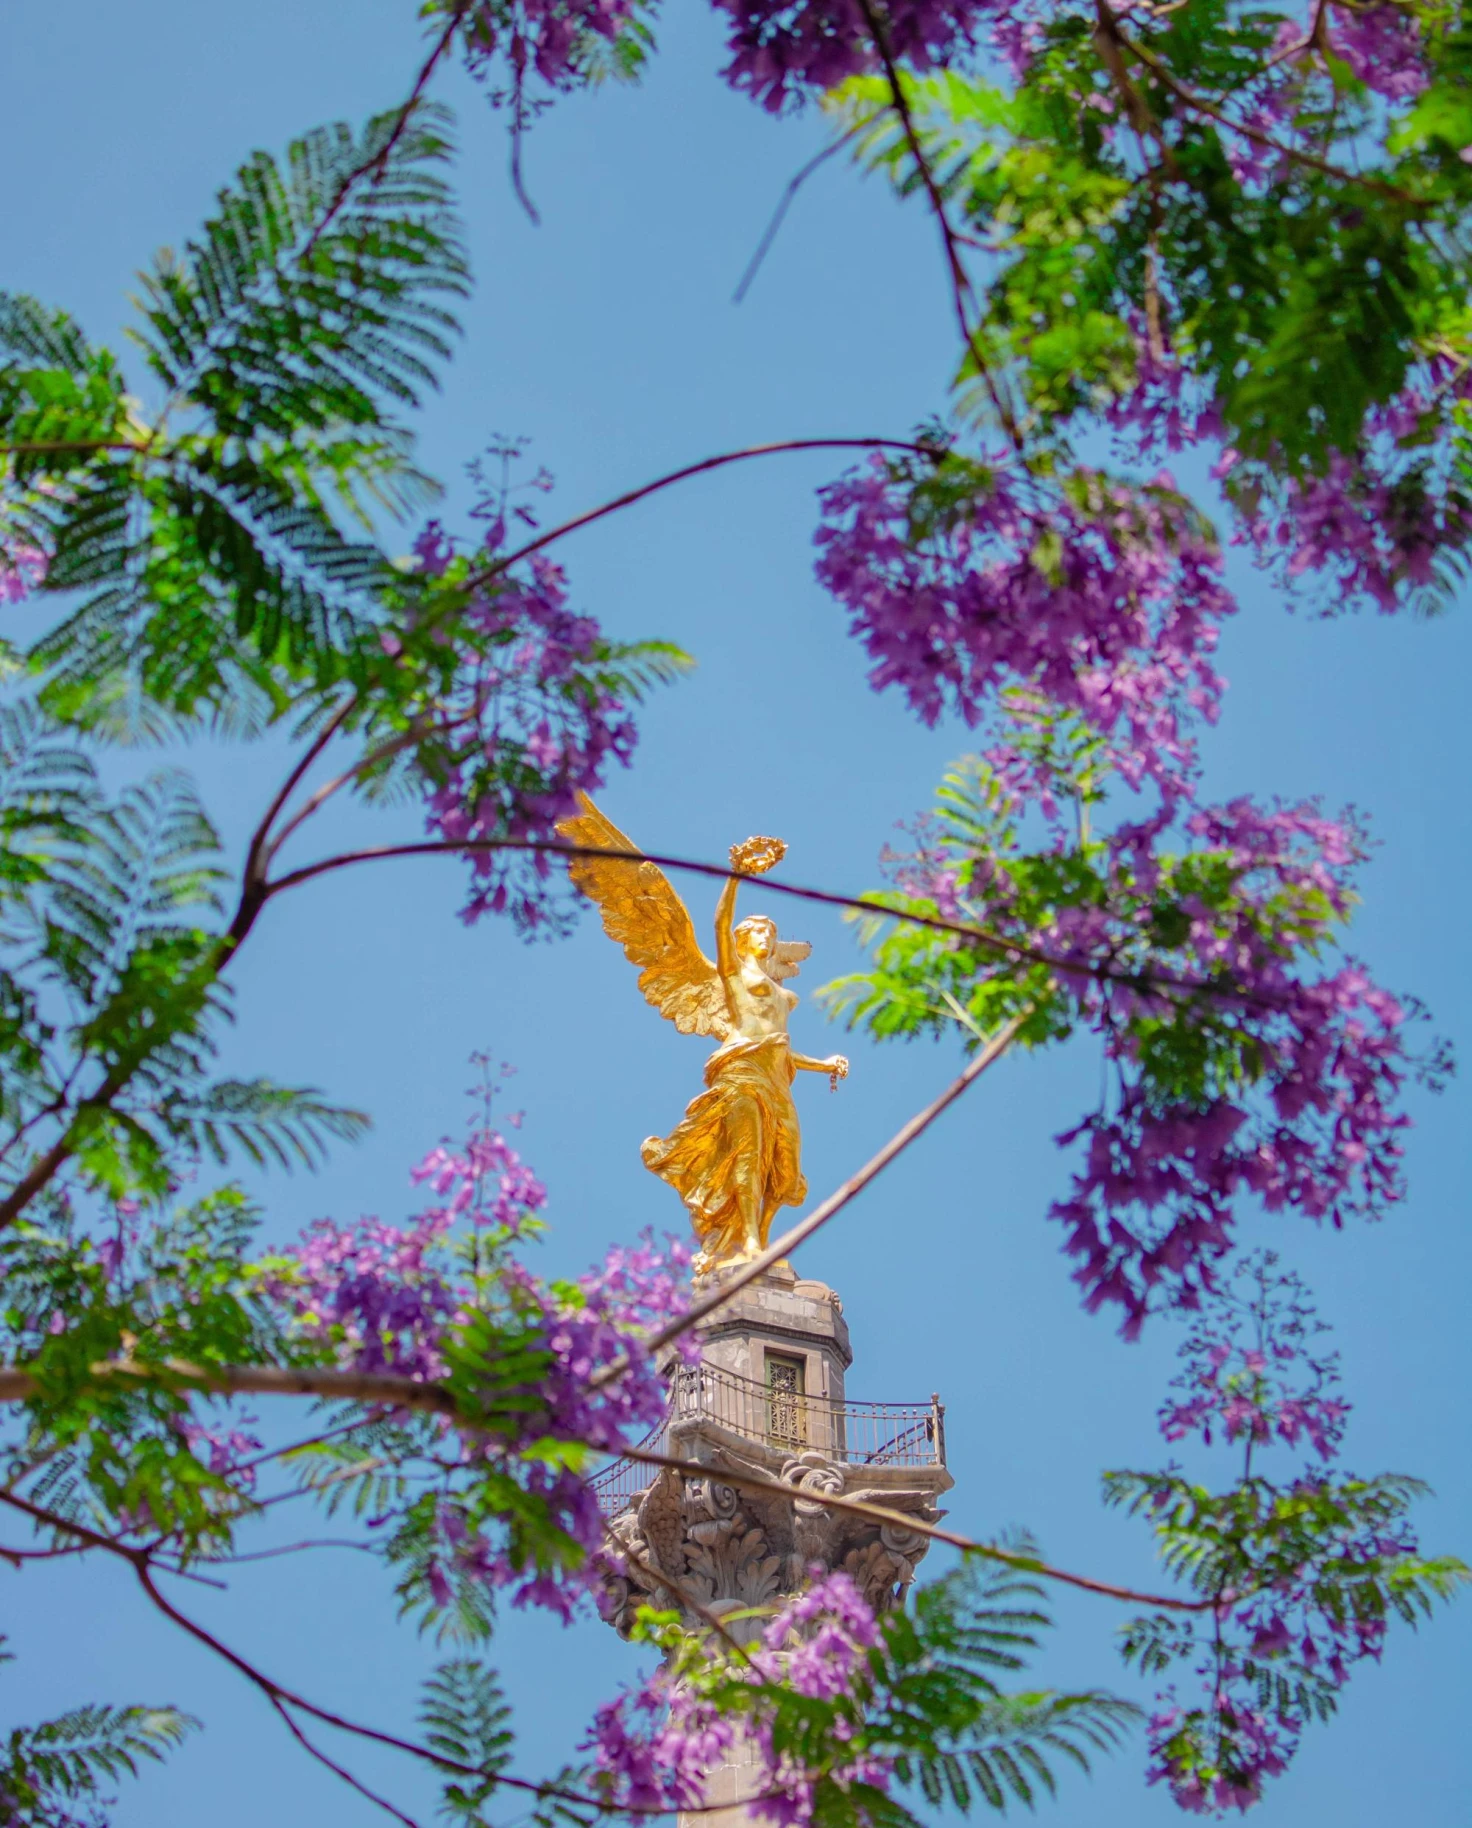 Landmark with golden angel with tree and blossoming flowers in front on clear day.